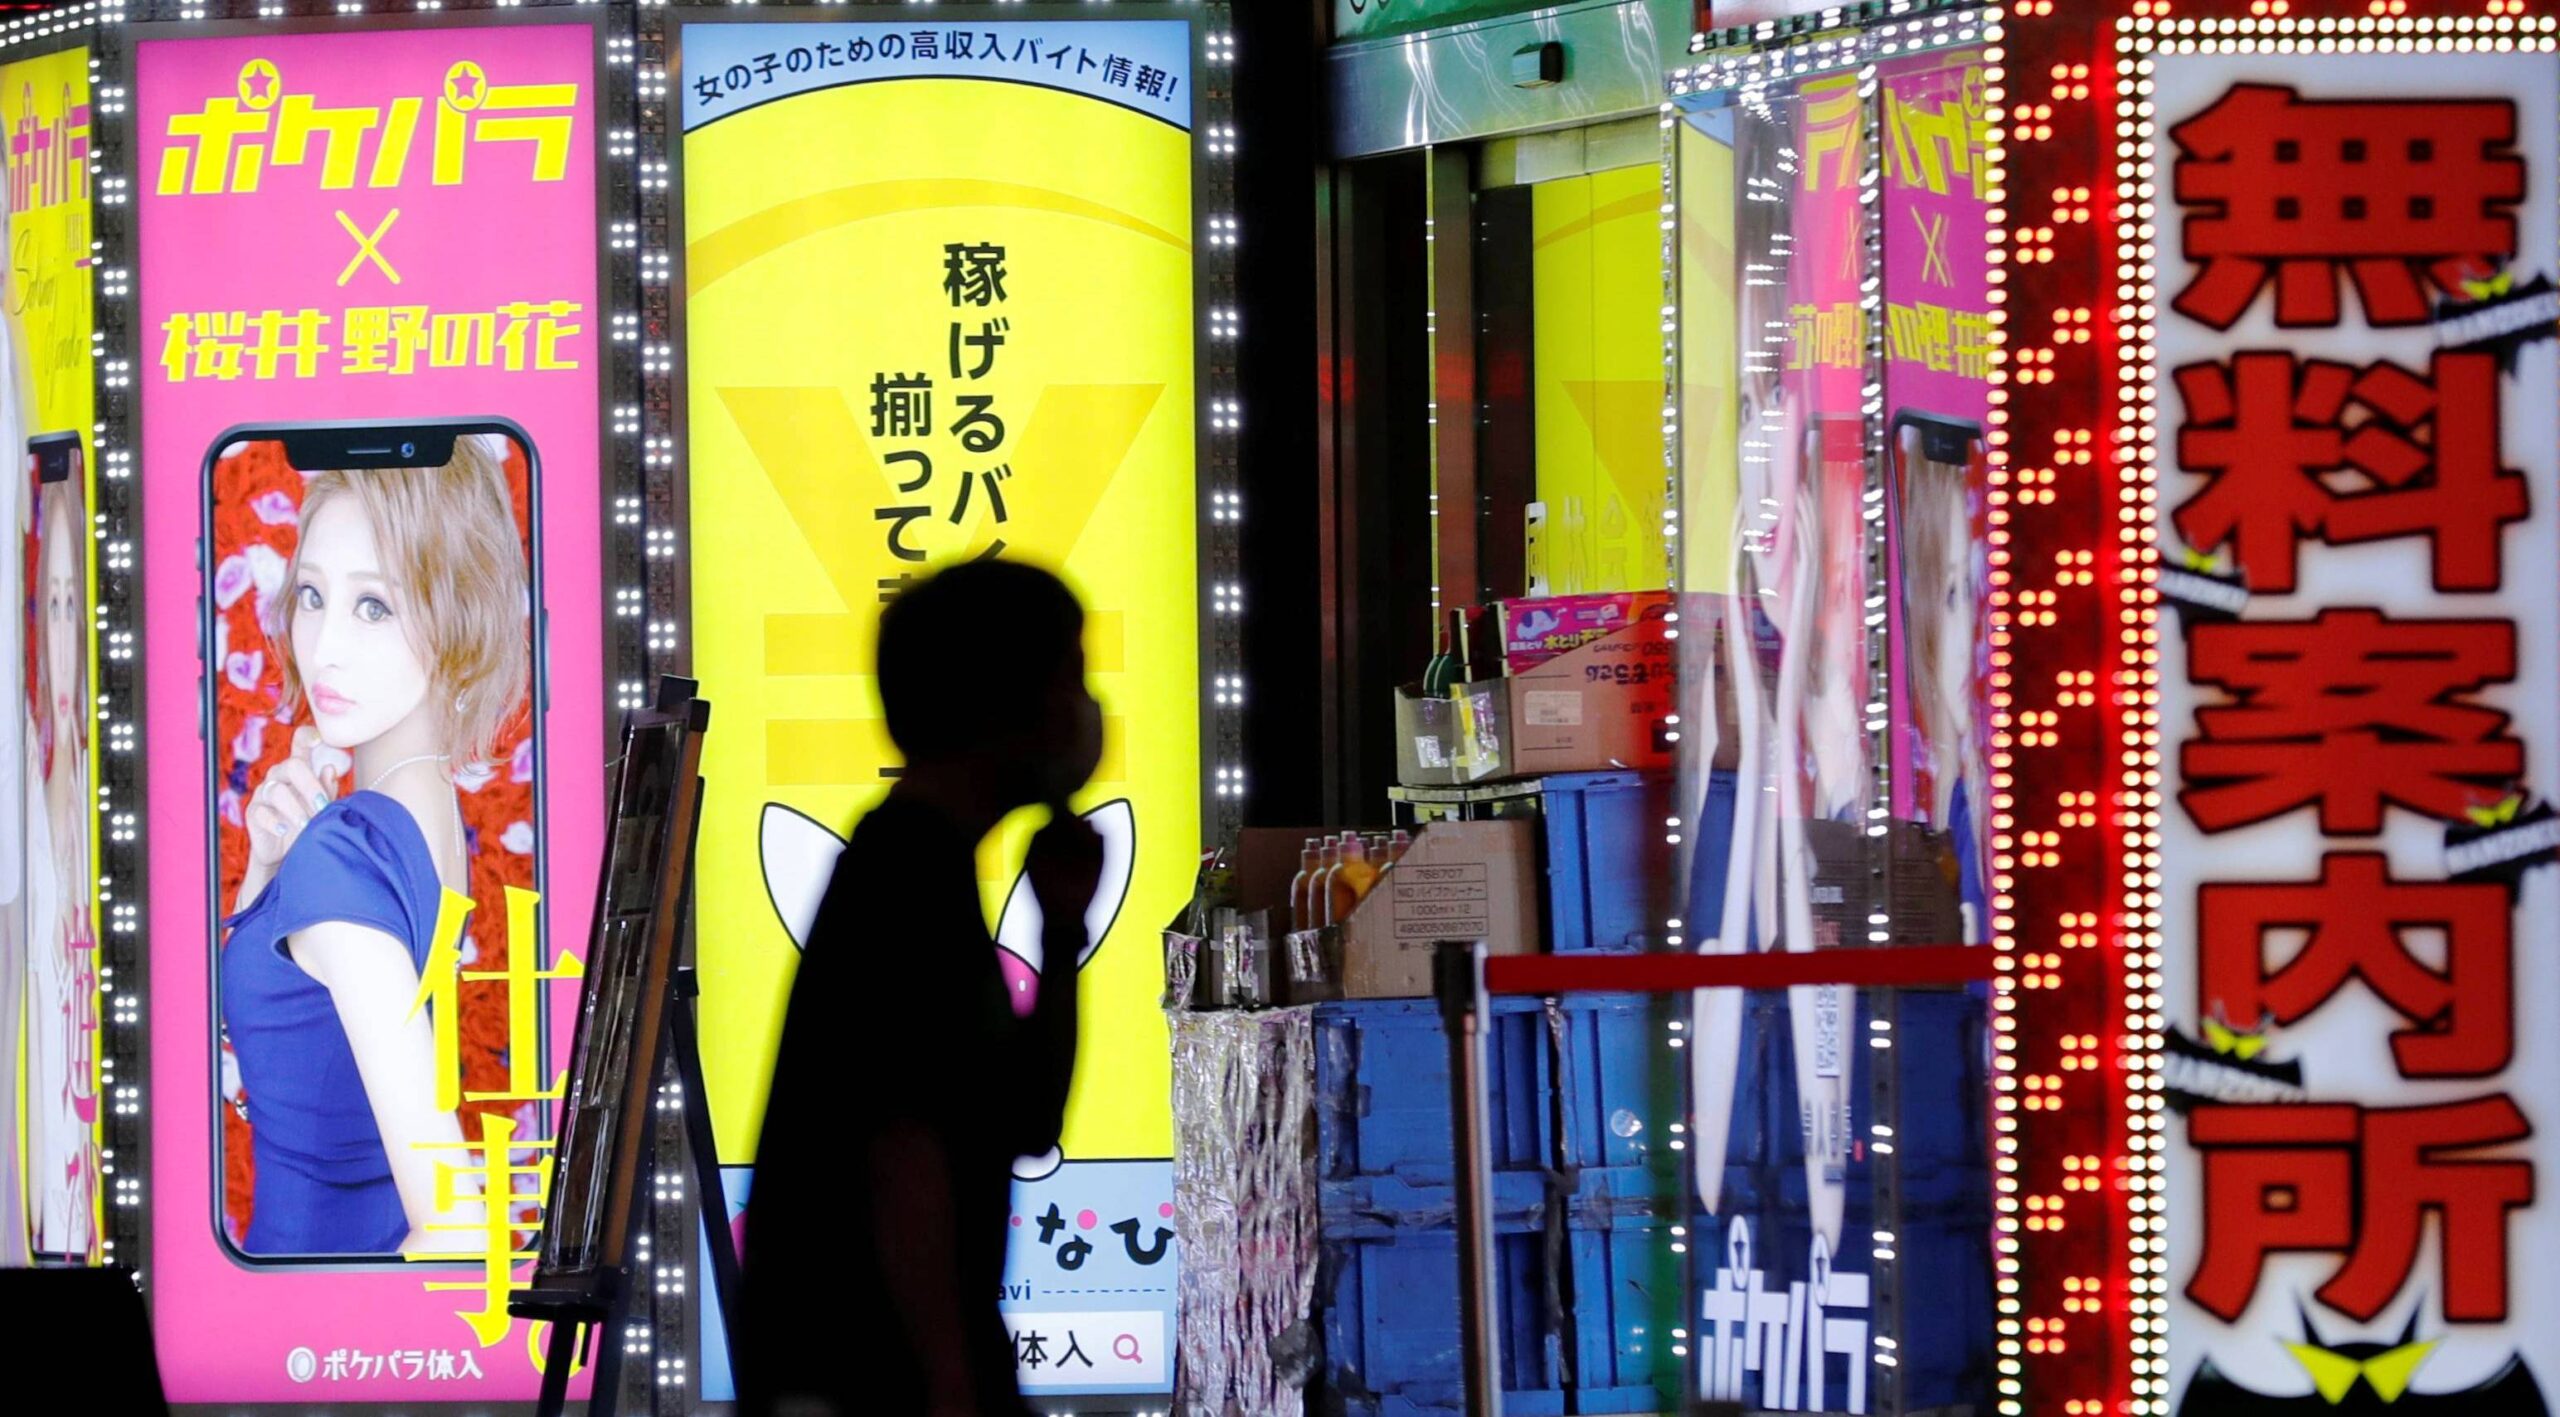 A man wearing a face mask walks past a signboard of a bar in the Kabukicho district, amid the coronavirus disease (COVID-19) outbreak in Tokyo, Japan, July 14, 2020. REUTERS/Kim Kyung-Hoon